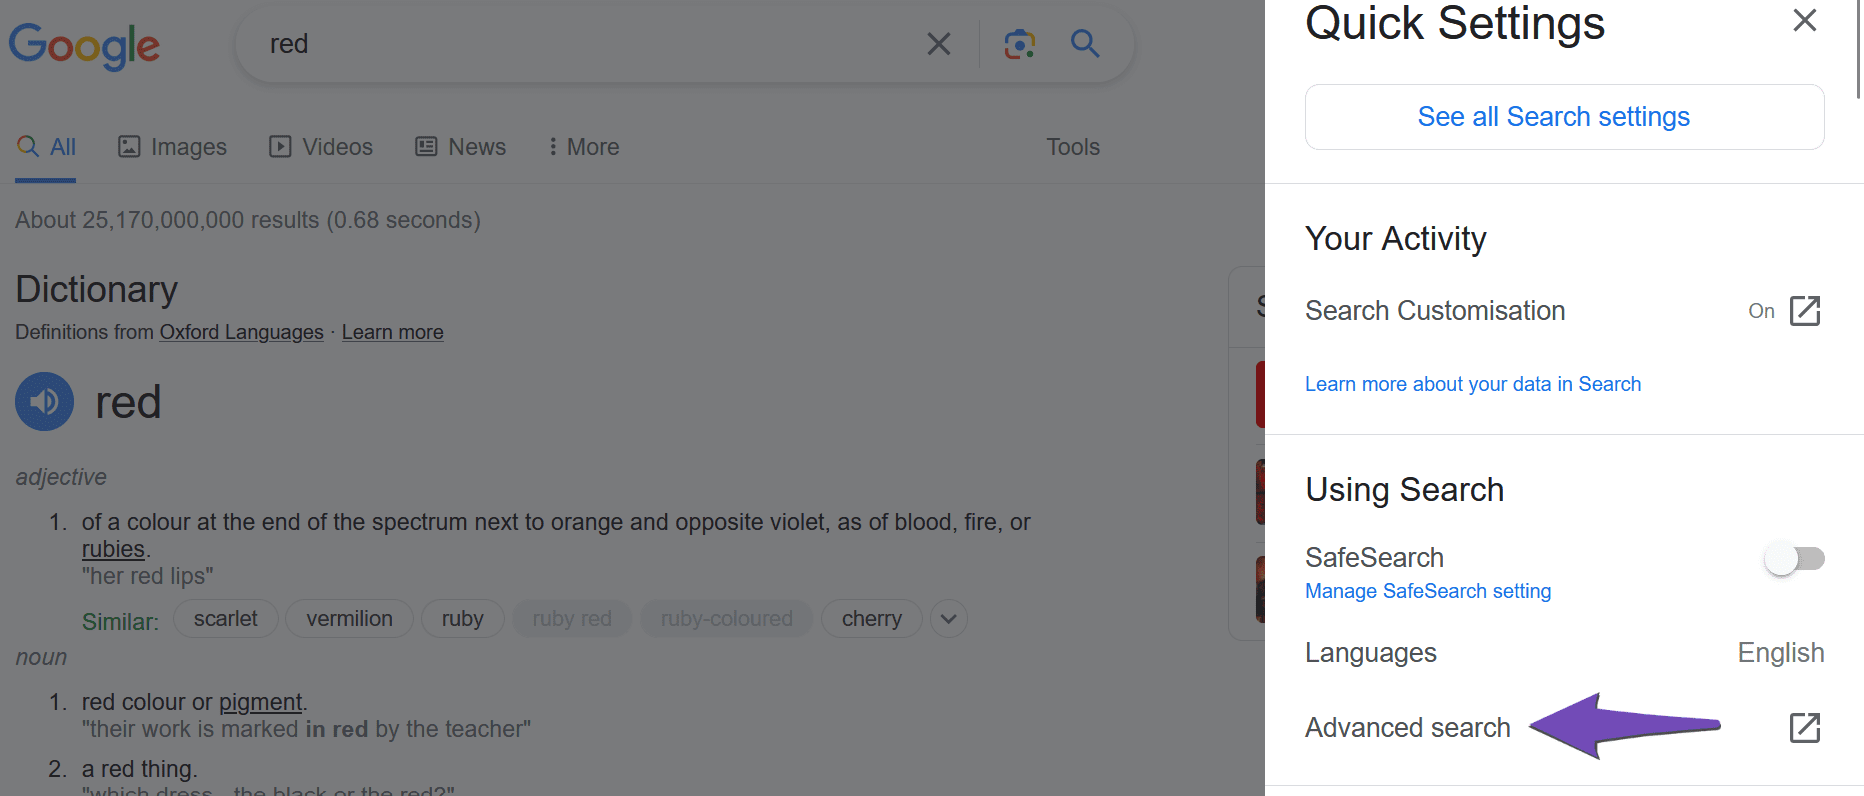 Access Advanced search from Google Quick Settings